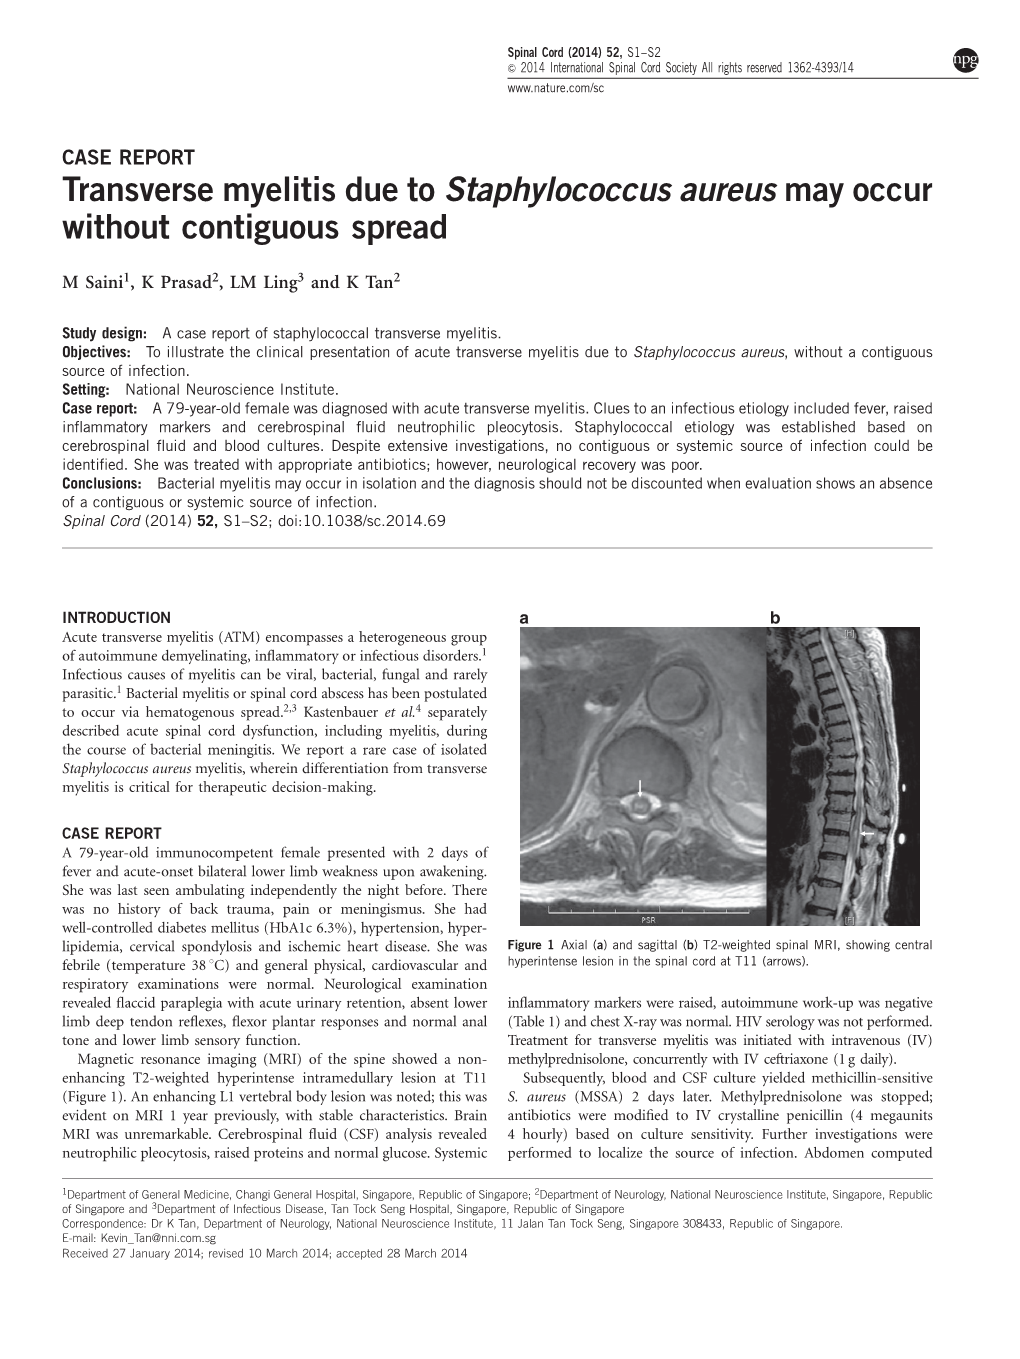 Transverse Myelitis Due to Staphylococcus Aureus May Occur Without Contiguous Spread